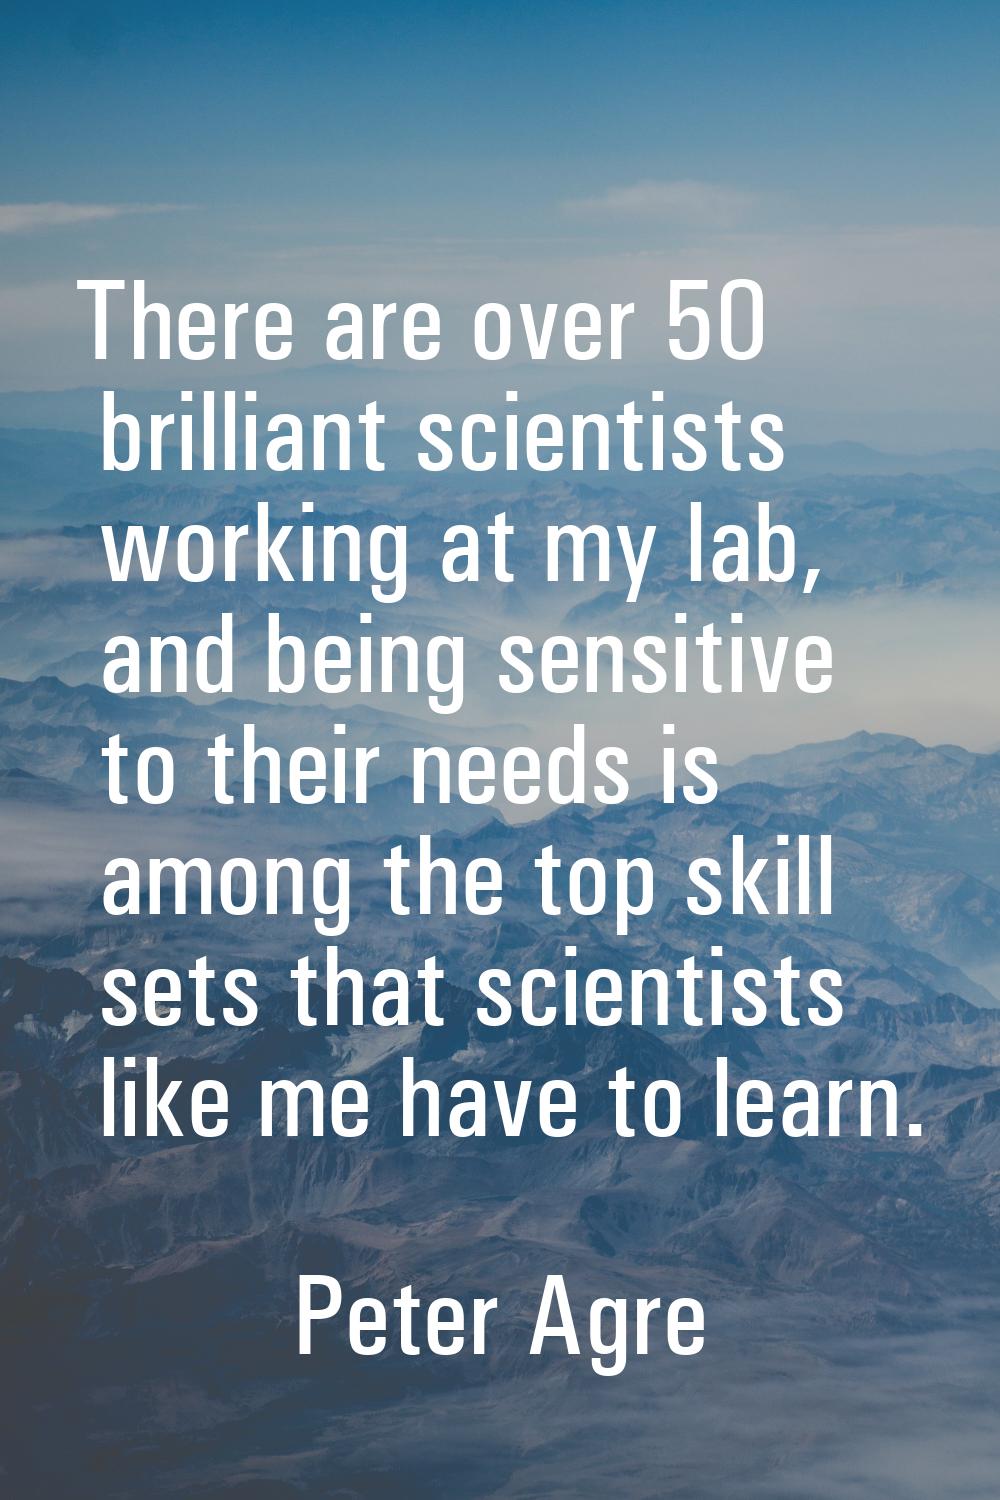 There are over 50 brilliant scientists working at my lab, and being sensitive to their needs is amo